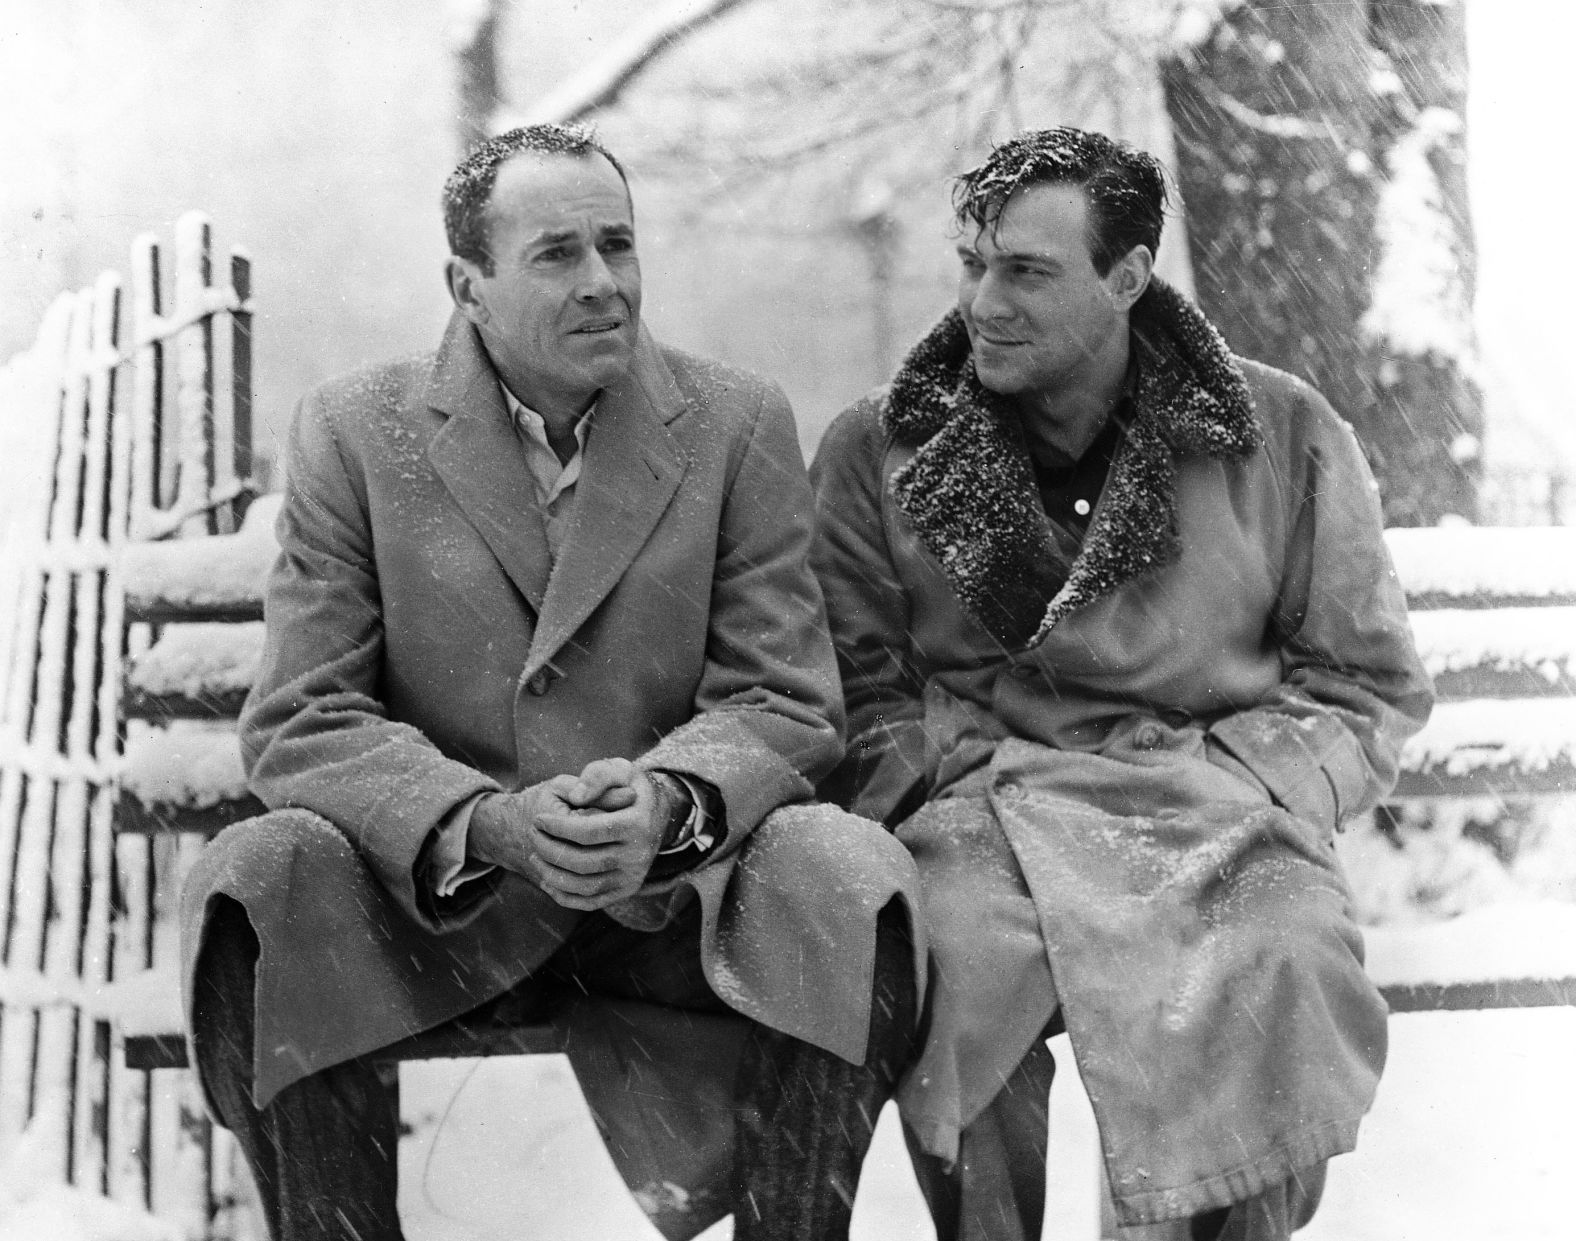 Plummer, right, stars in the 1958 film "Stage Struck" with Henry Fonda. It was the first movie role for Plummer, who had previously worked in theater and television.